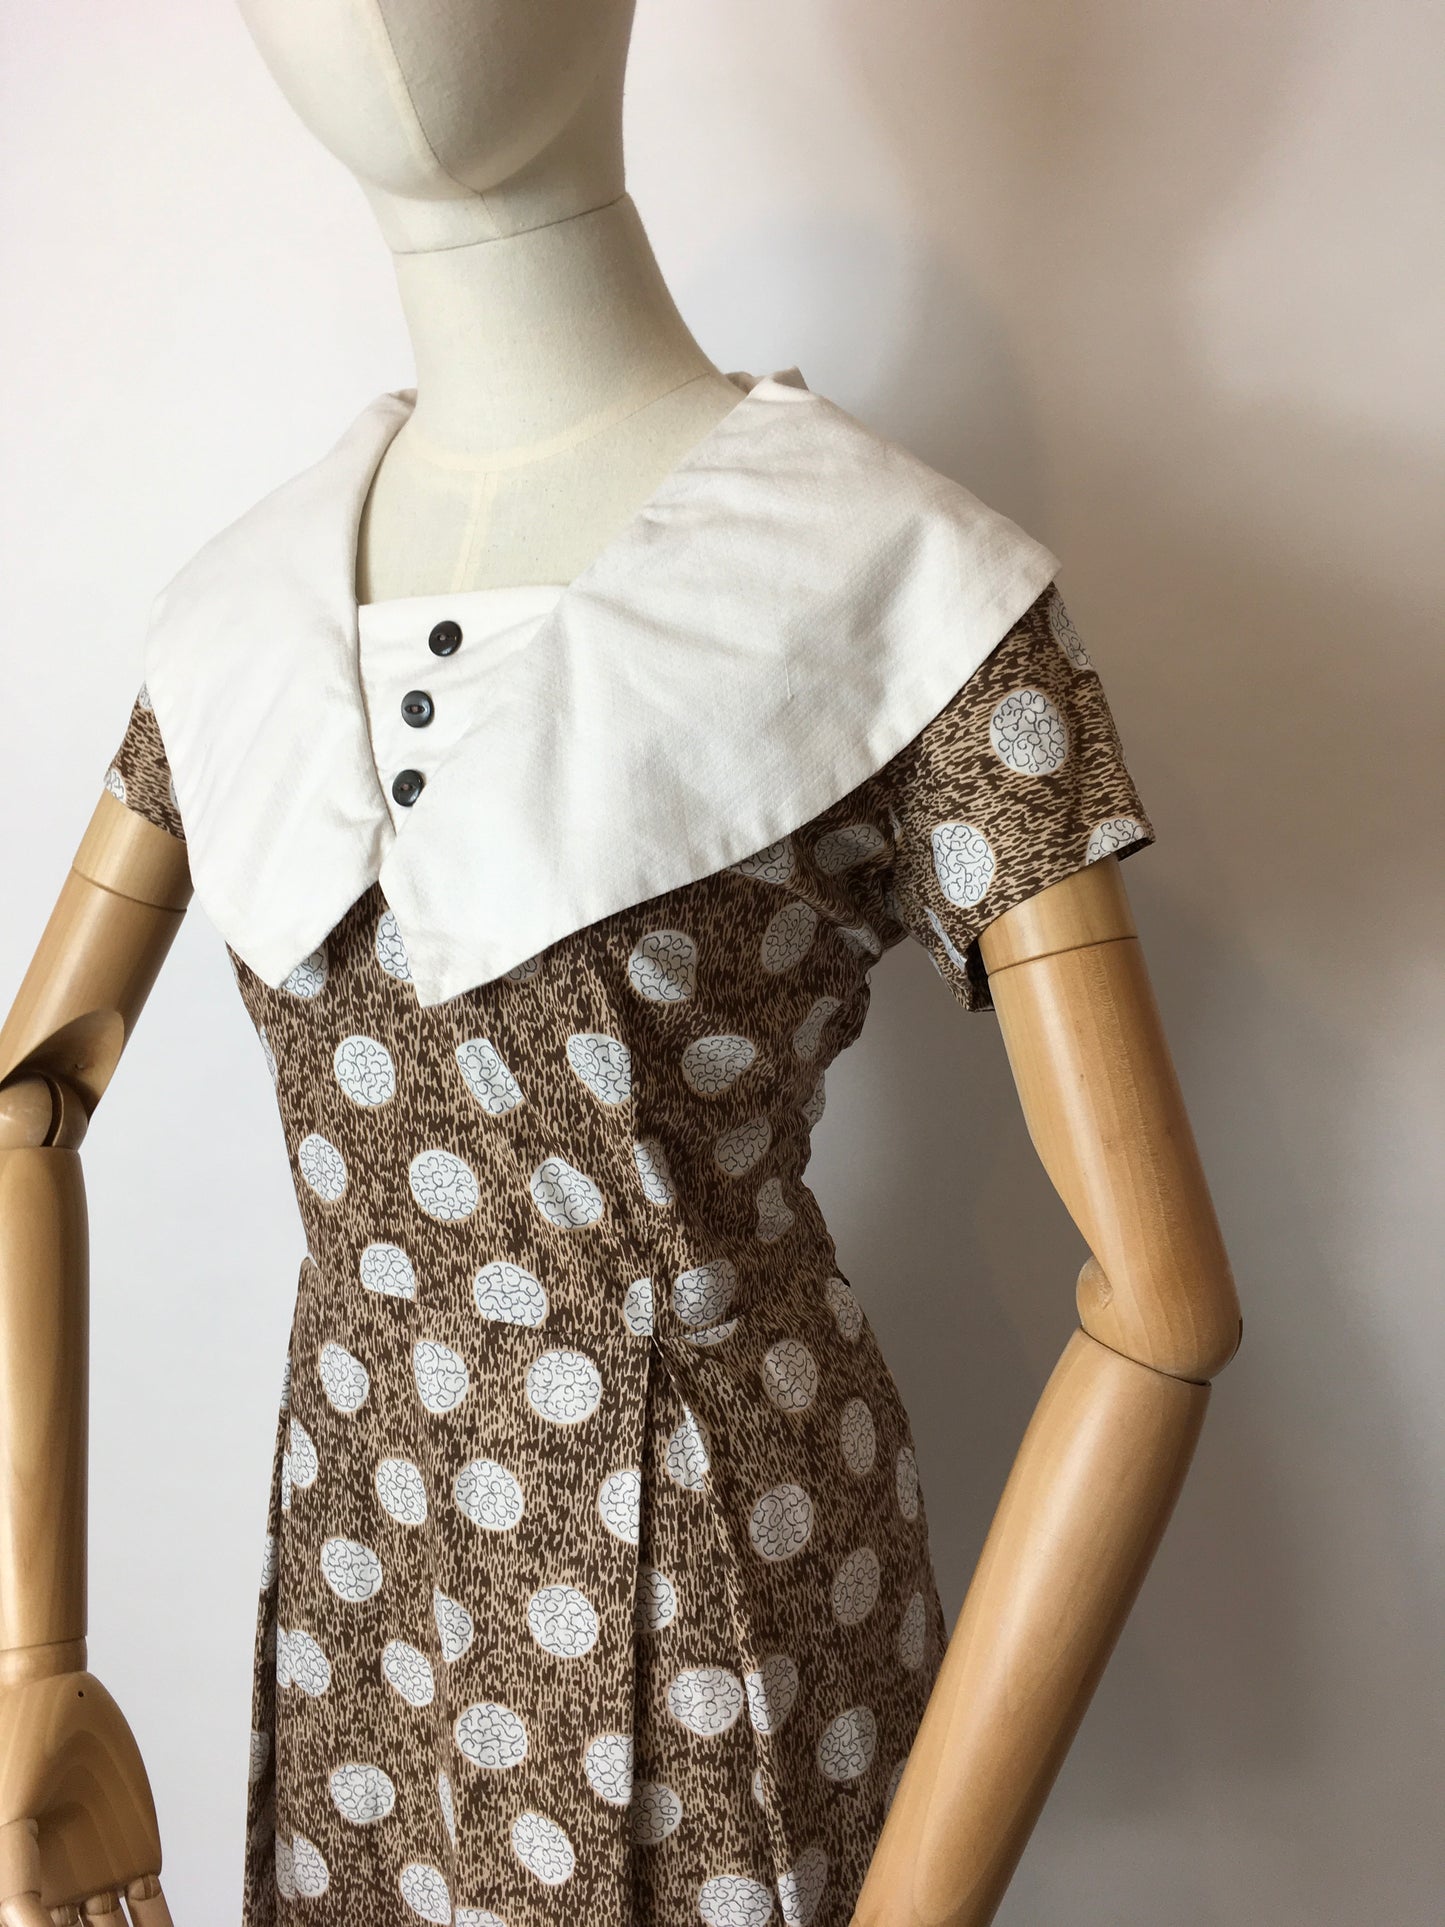 Original 1950s Cotton Day Dress - Lovely Geometric Print in Browns, Beiges and Whites